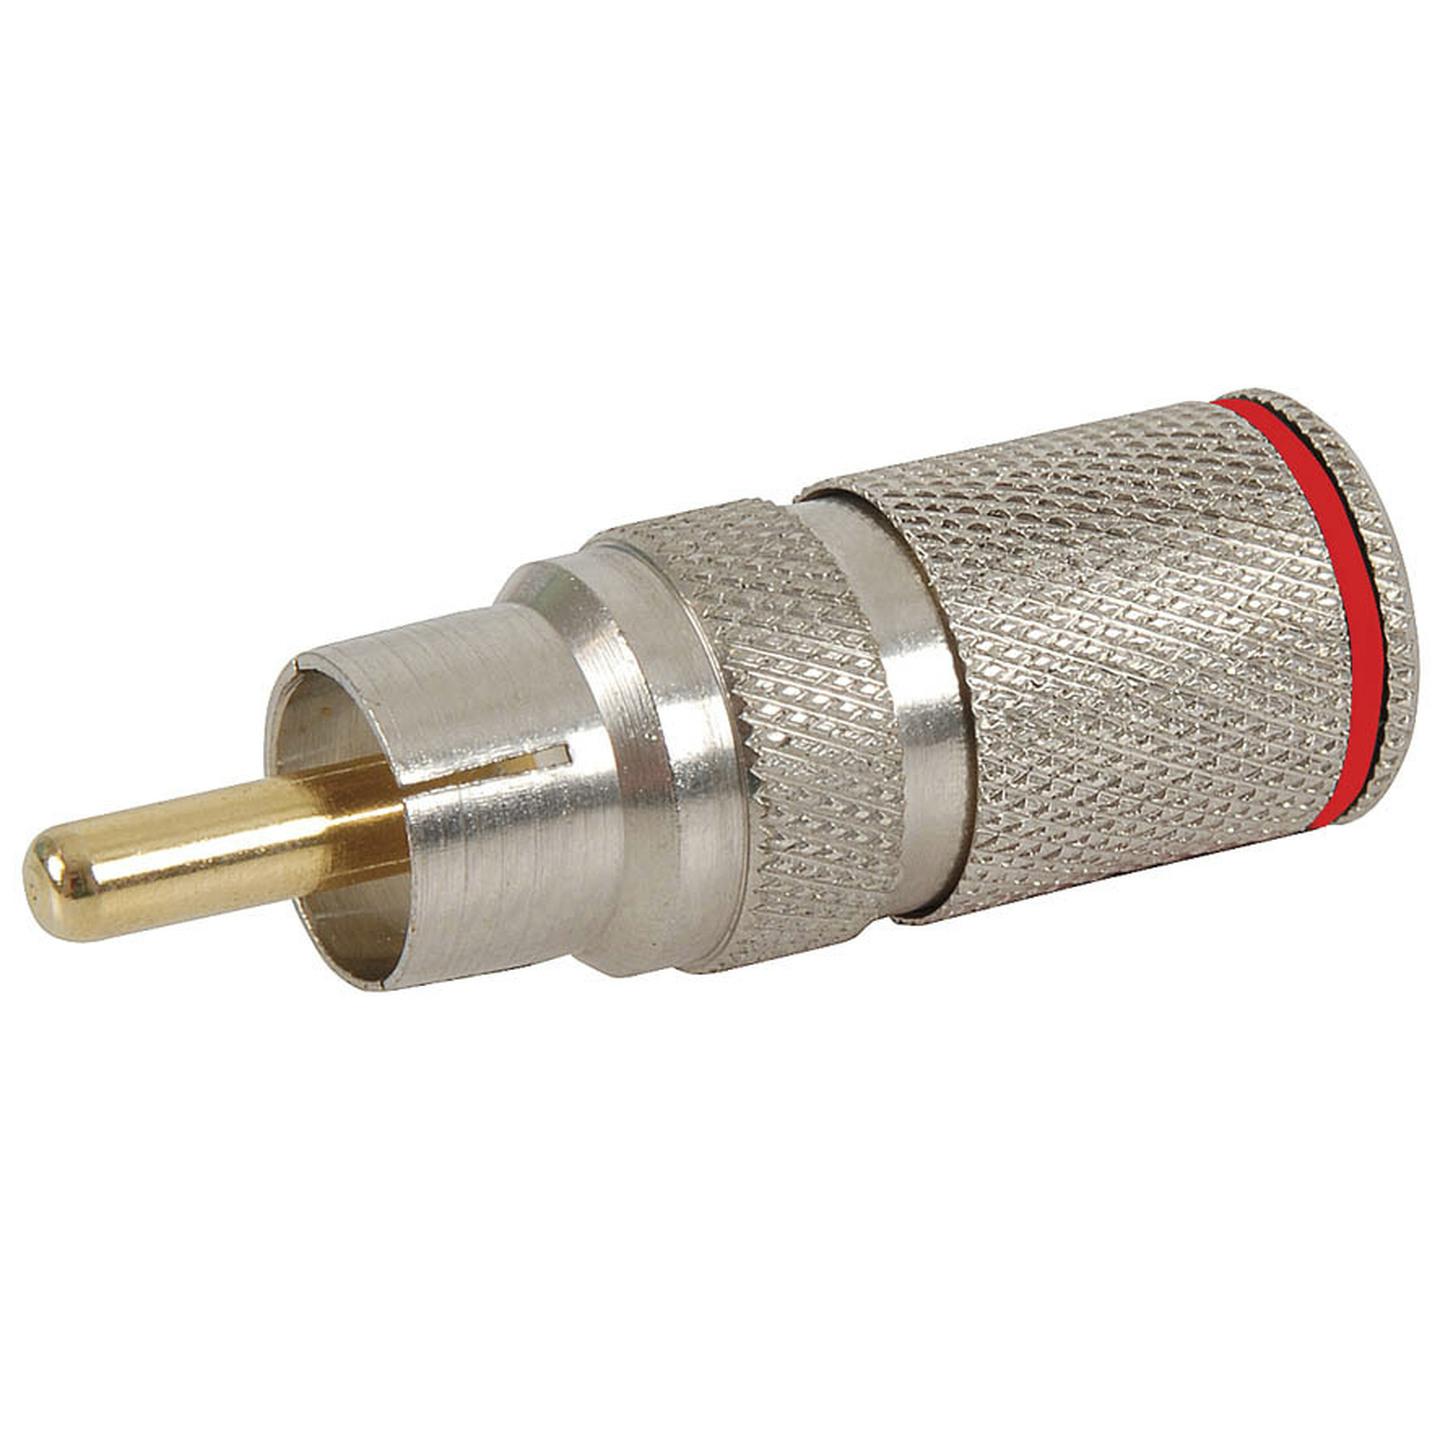 Crimpless RCA Plug - Red